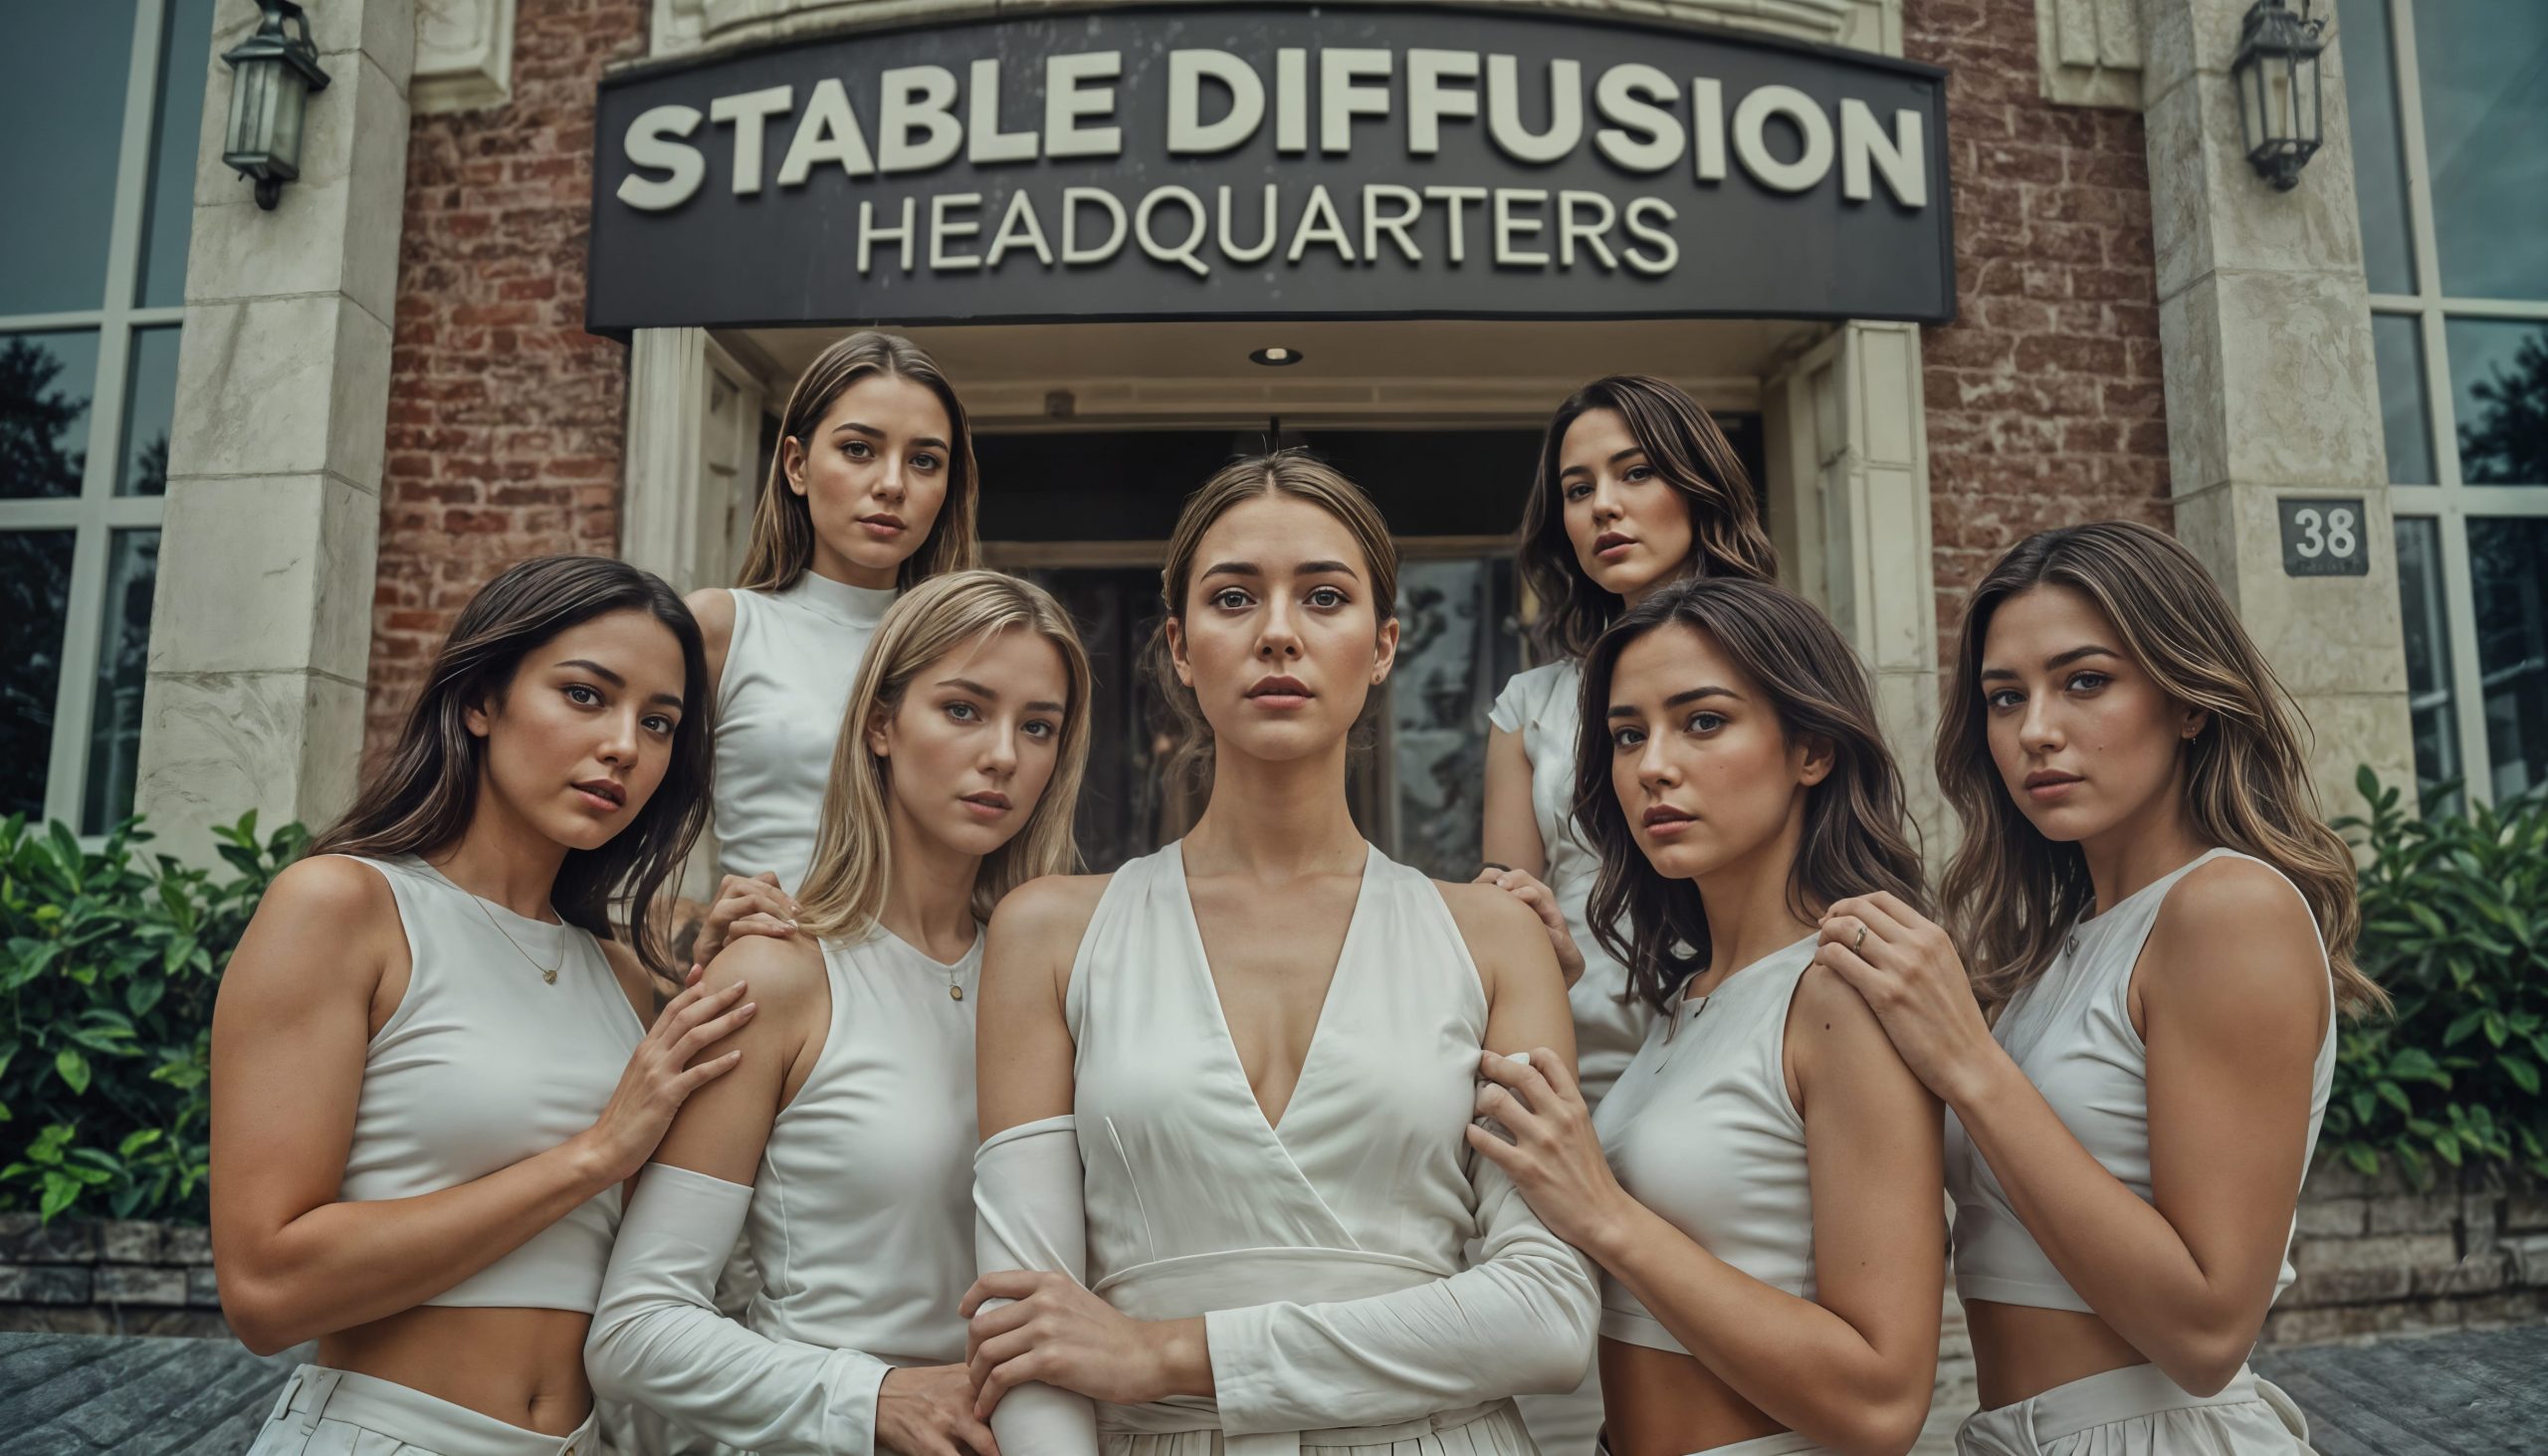 Group photo of seven women wearing matching white outfits standing in front of the Stable Diffusion Headquarters. The building features a brick facade and white stone columns. The women have serious expressions and are arranged in two rows, with one woman in the center slightly ahead of the others. [Alt text by ALT Text Artist GPT]